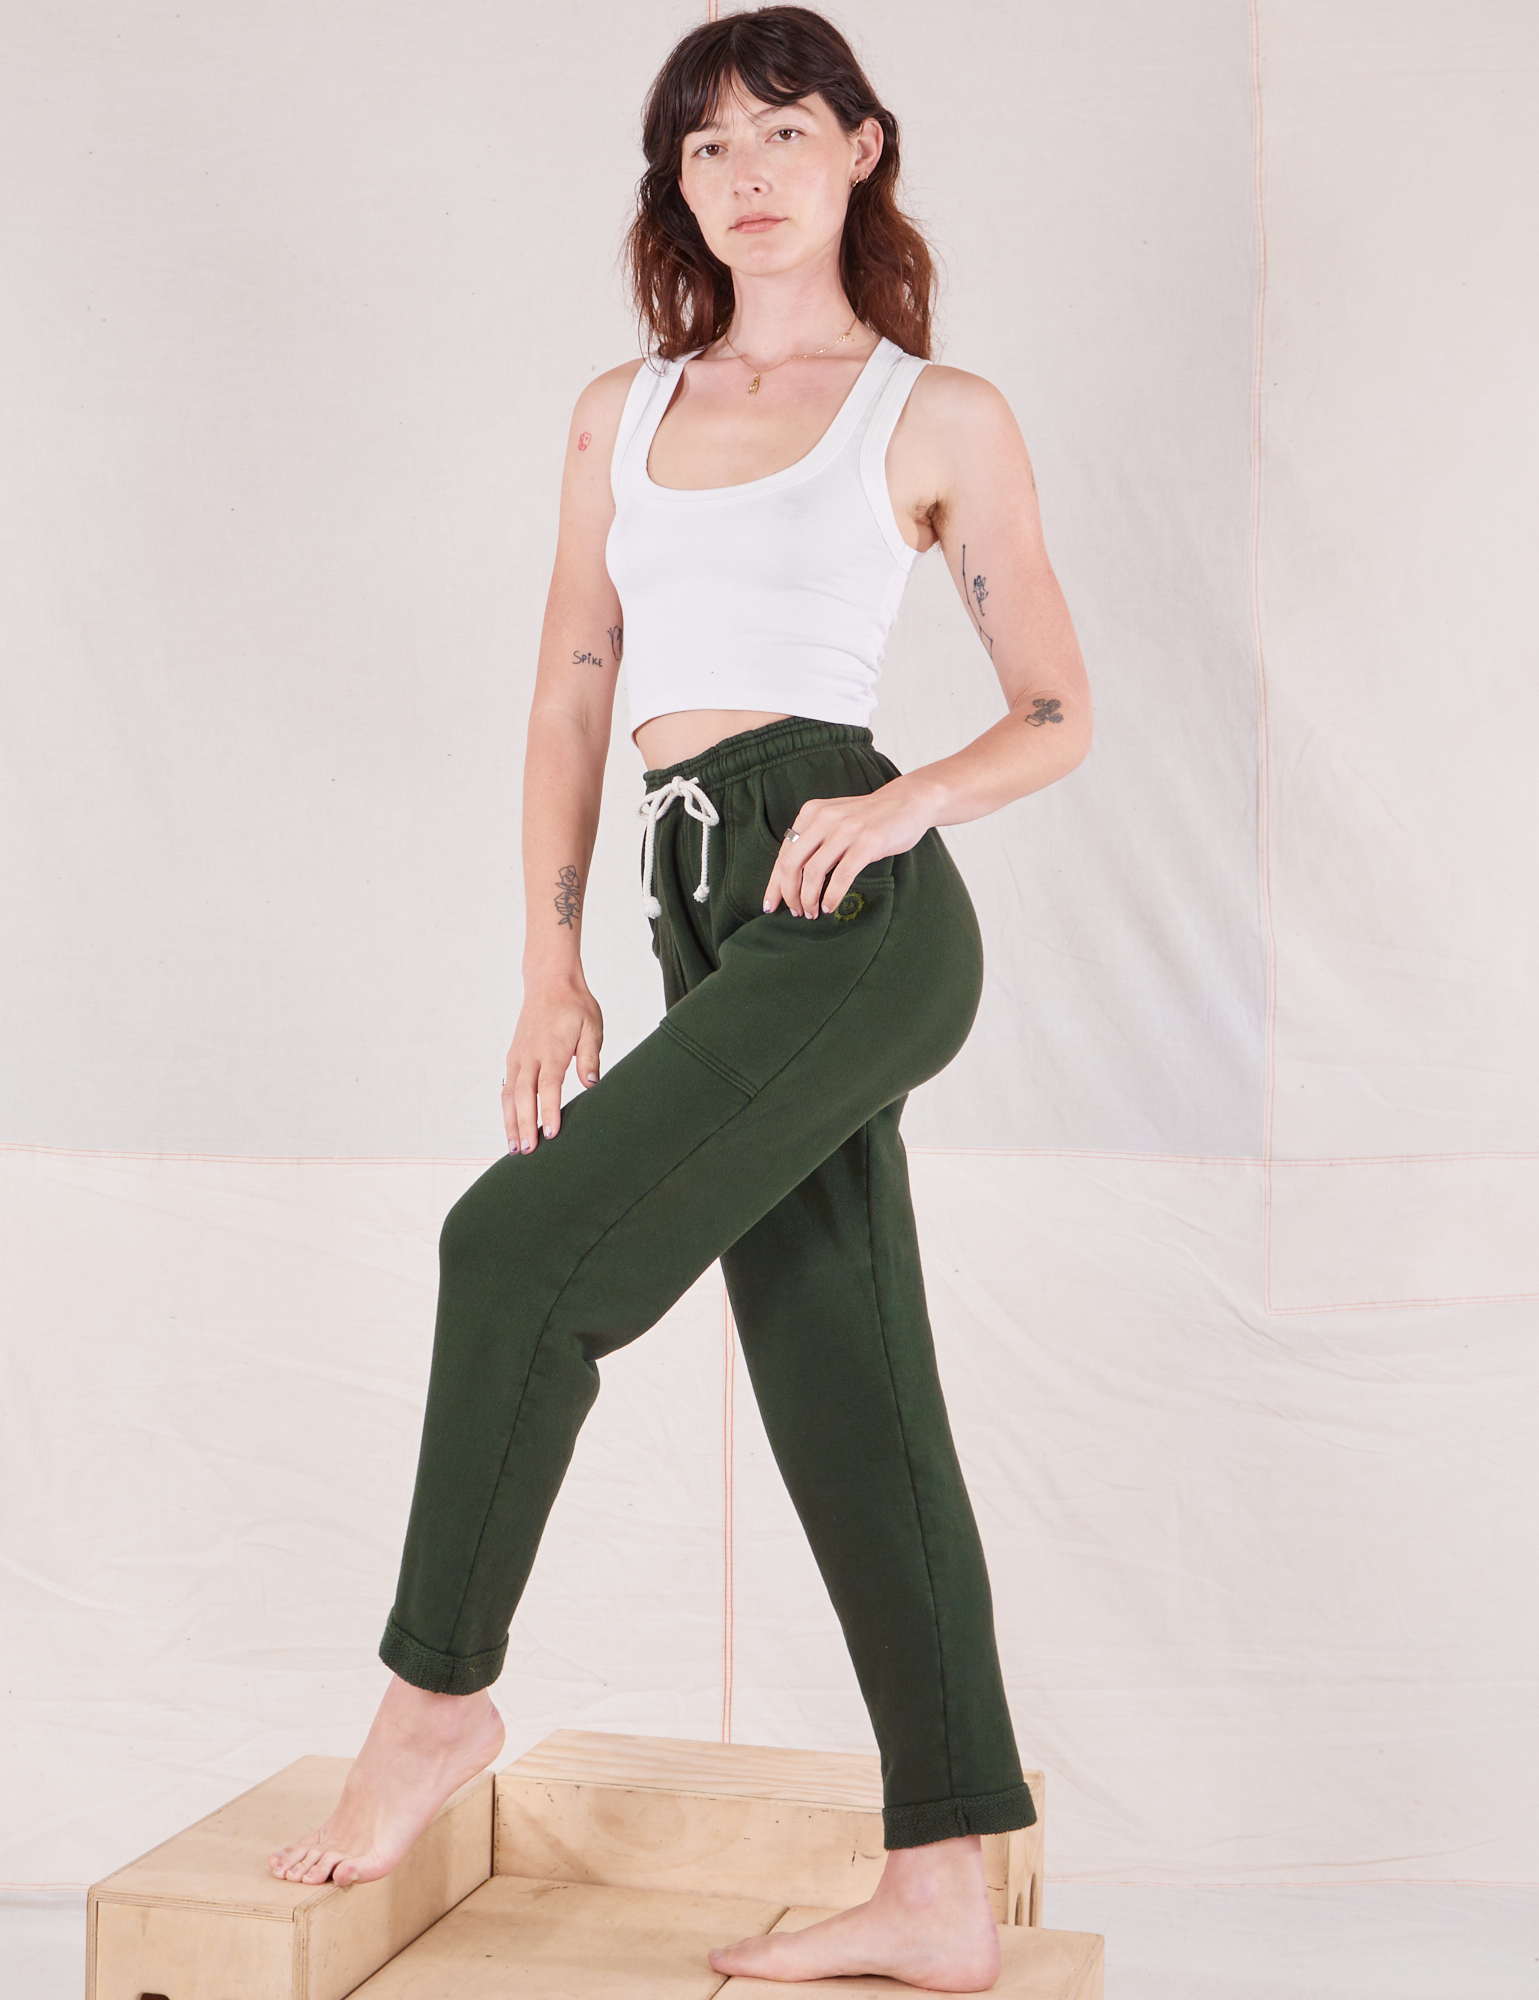 Alex is wearing Rolled Cuff Sweat Pants in Swamp Green and vintage off-white Cropped Tank Top